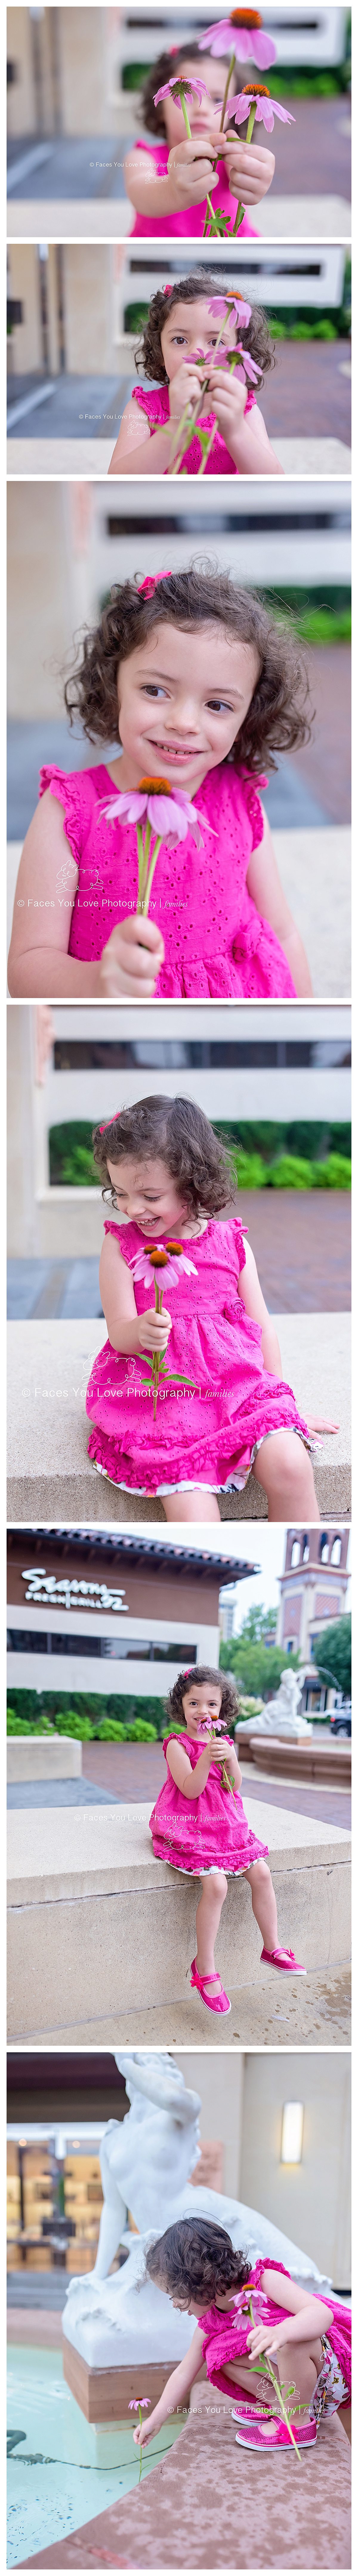 Child with flowers at portrait session | facesyoulove.com